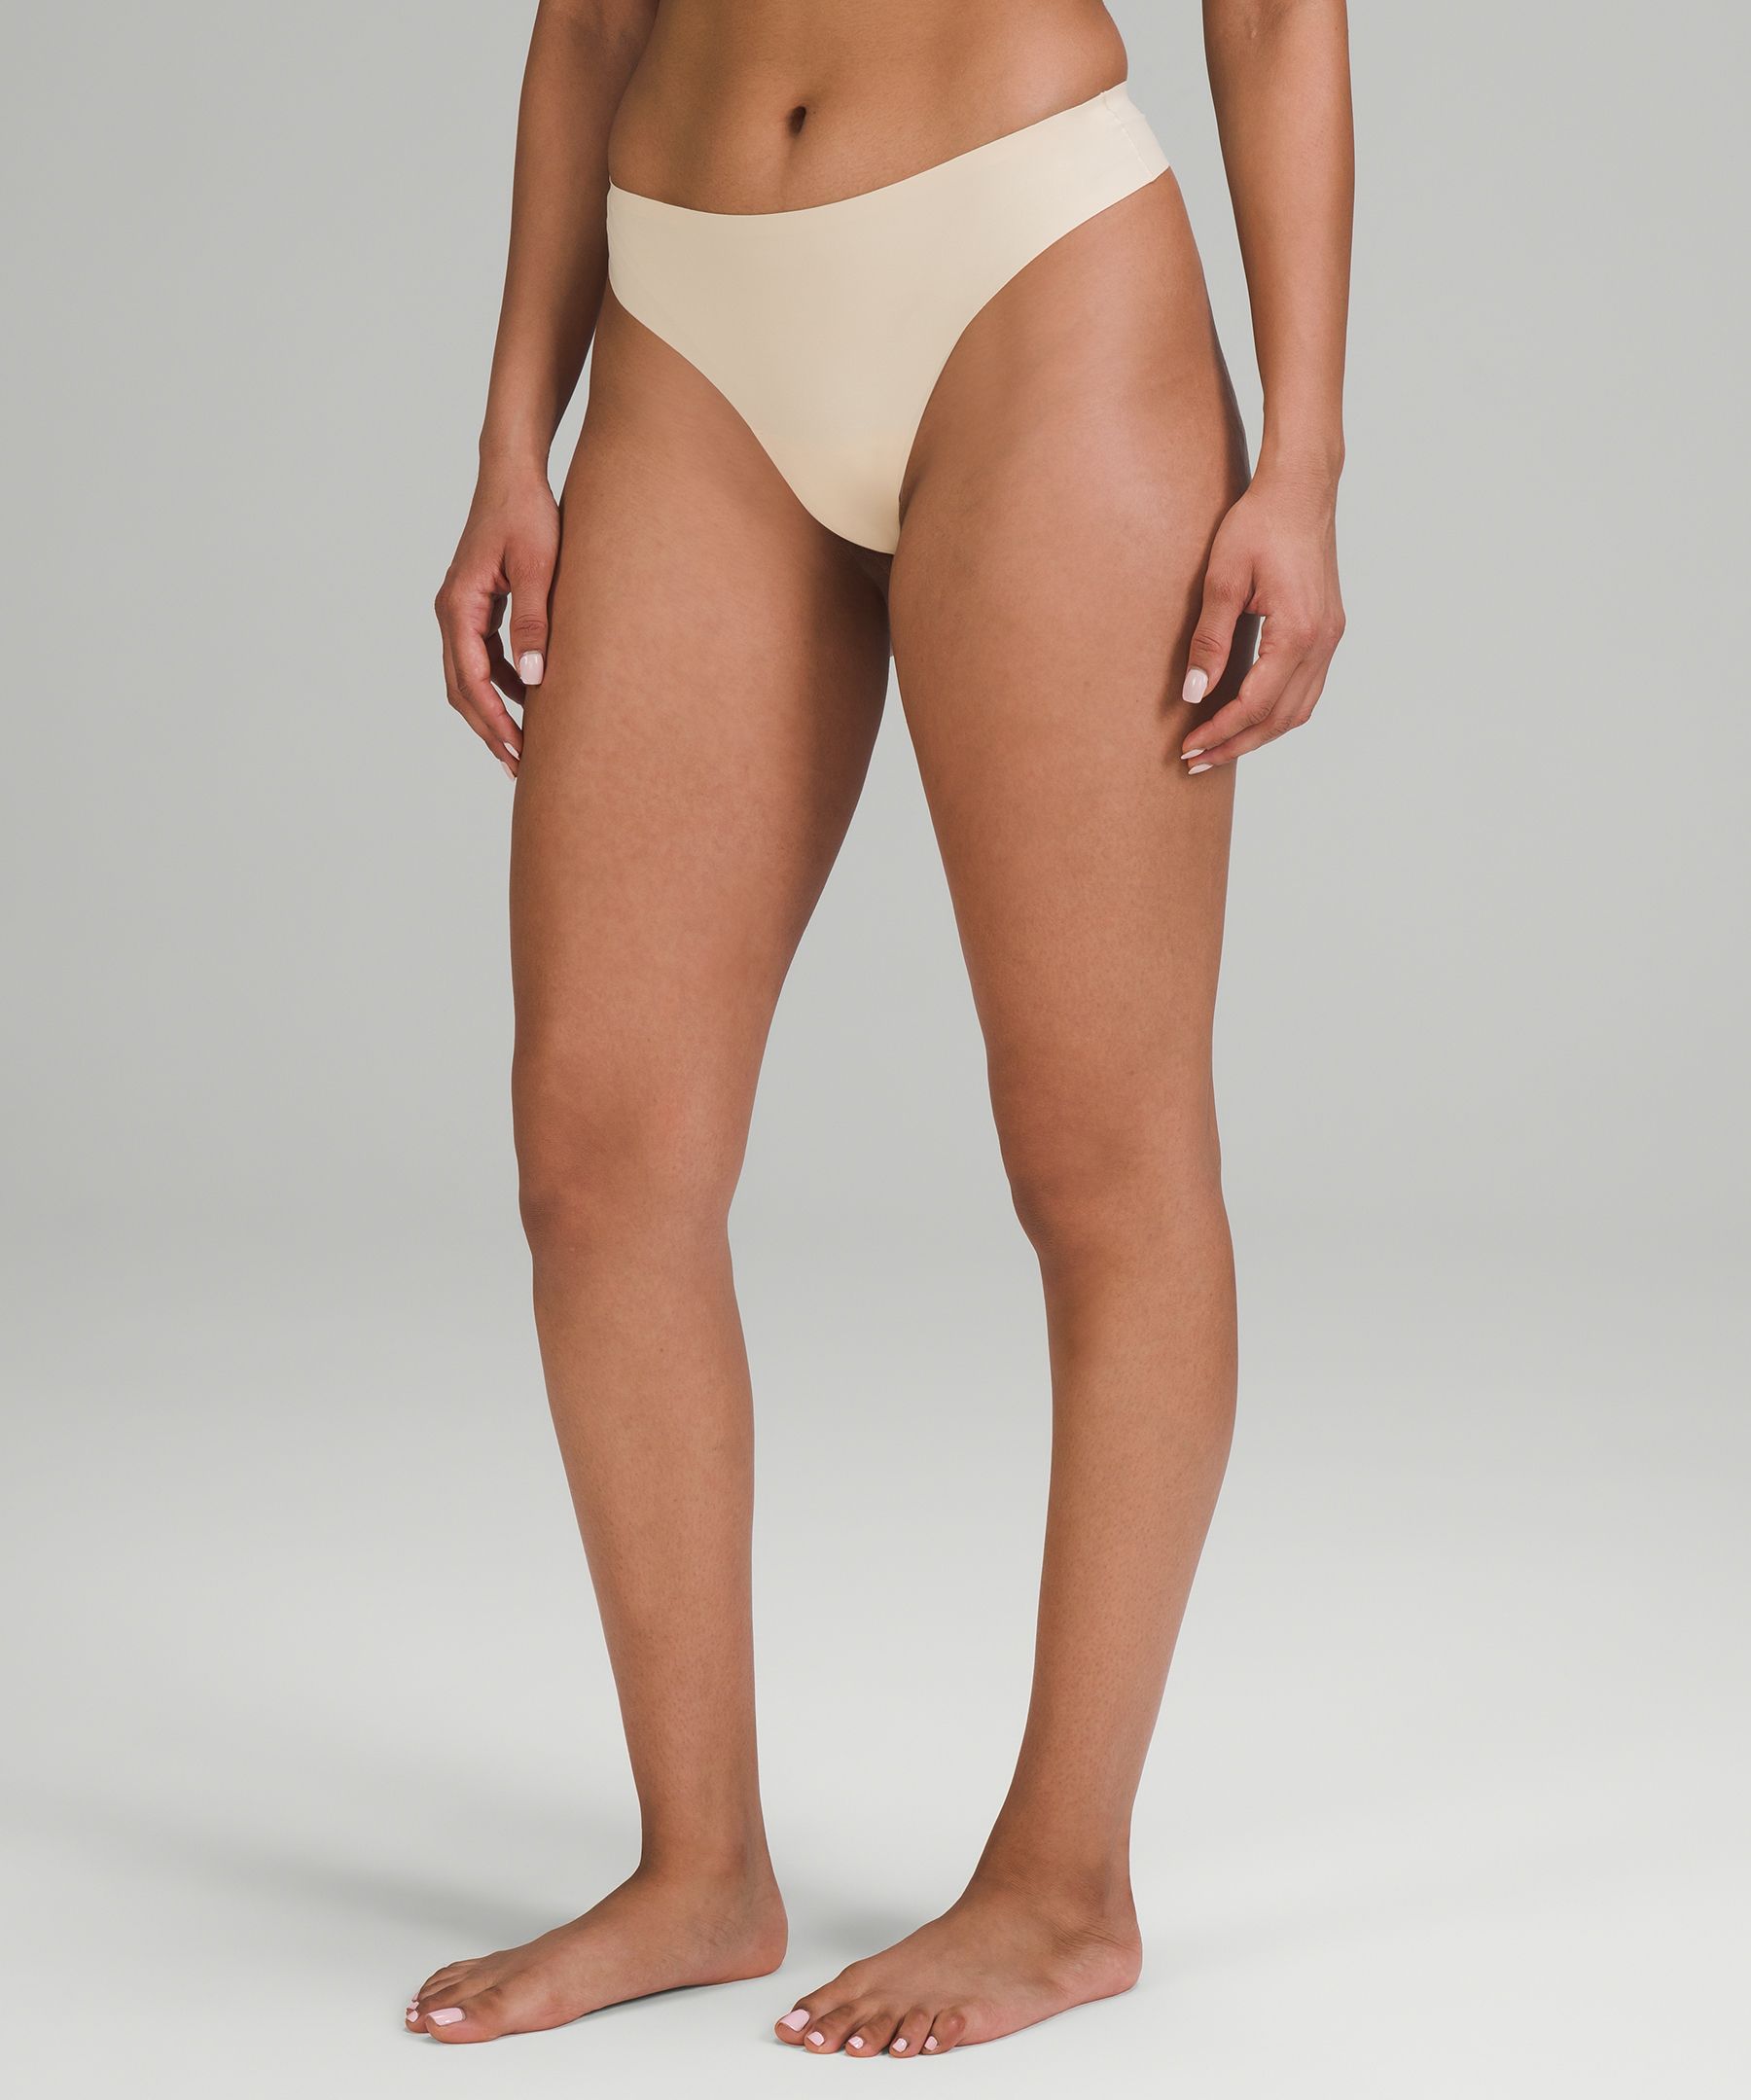 Lululemon Womens Underwear Best Sellers - Up To 60% OFF Now